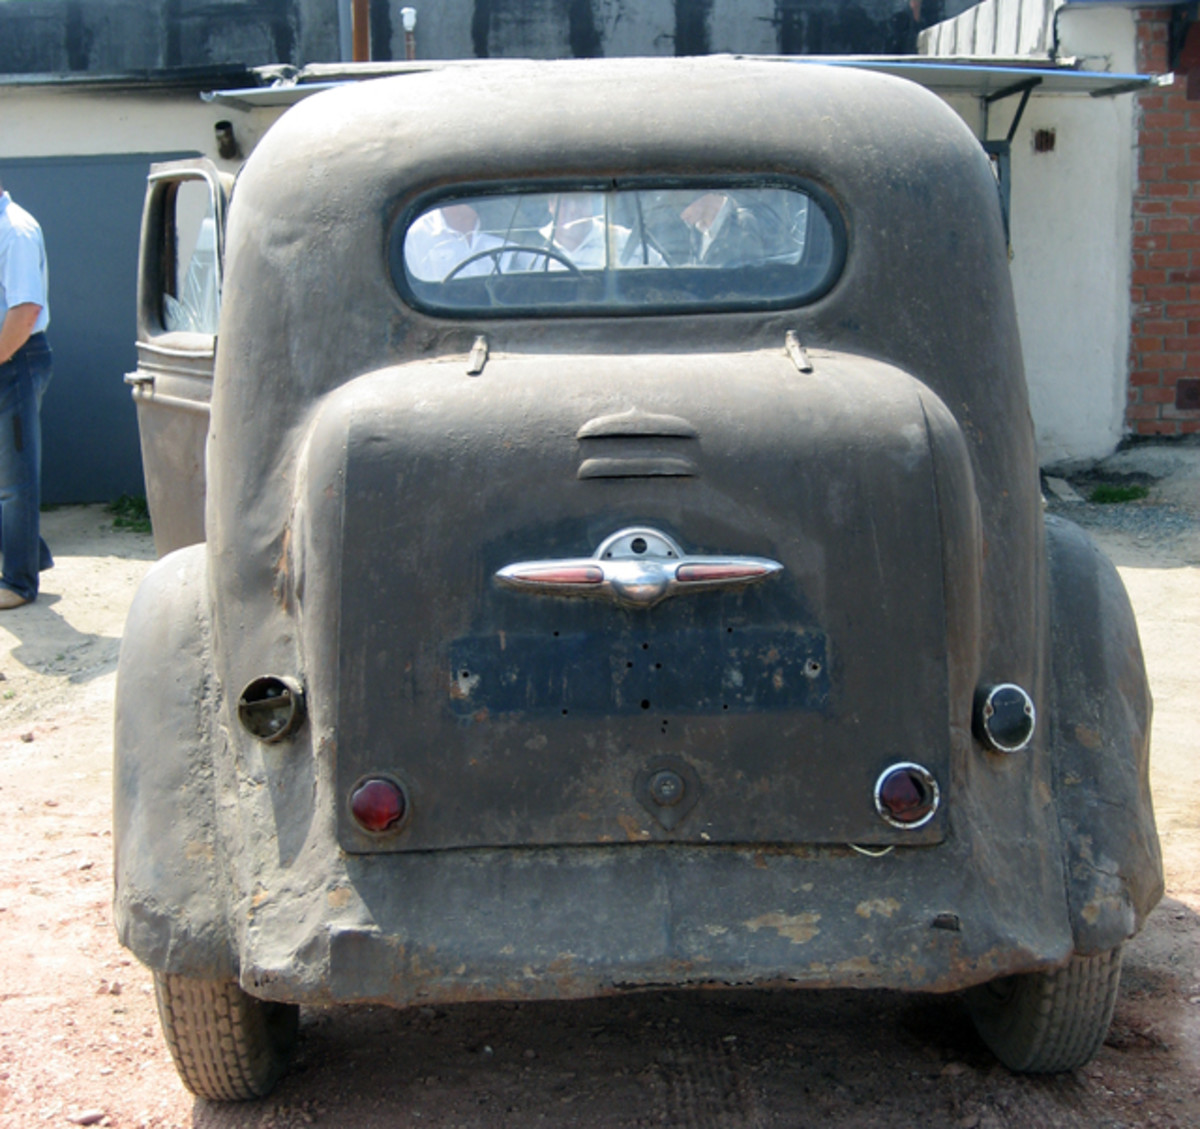  Early Toyodas are believed to have been exclusively distributed in Asia, so this car may have emigrated to Russia as a spoil of World War II.